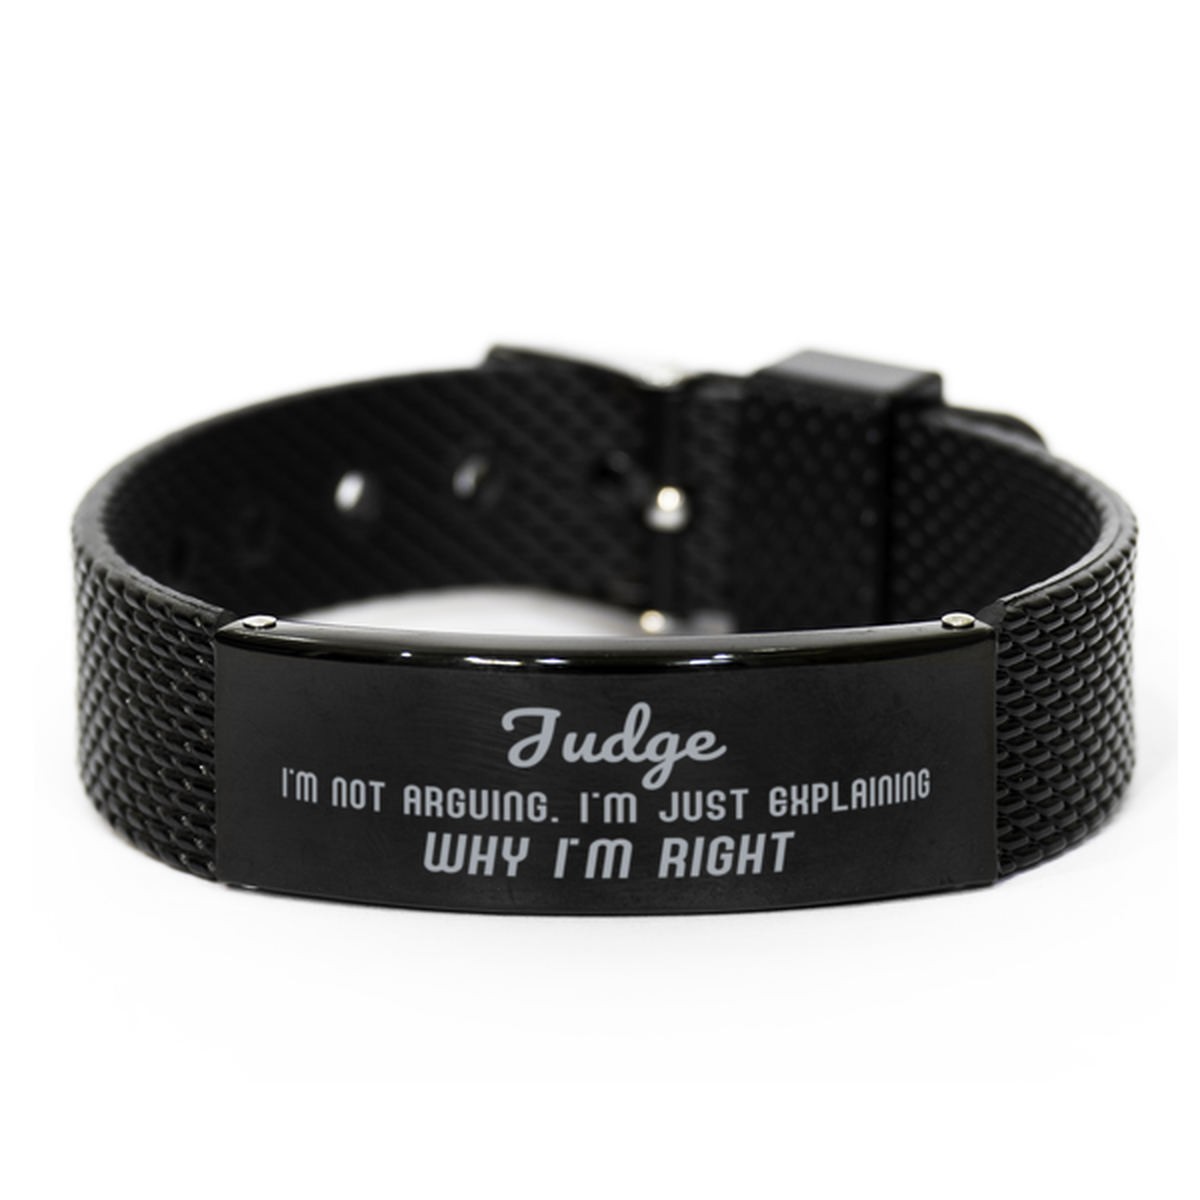 Judge I'm not Arguing. I'm Just Explaining Why I'm RIGHT Black Shark Mesh Bracelet, Funny Saying Quote Judge Gifts For Judge Graduation Birthday Christmas Gifts for Men Women Coworker